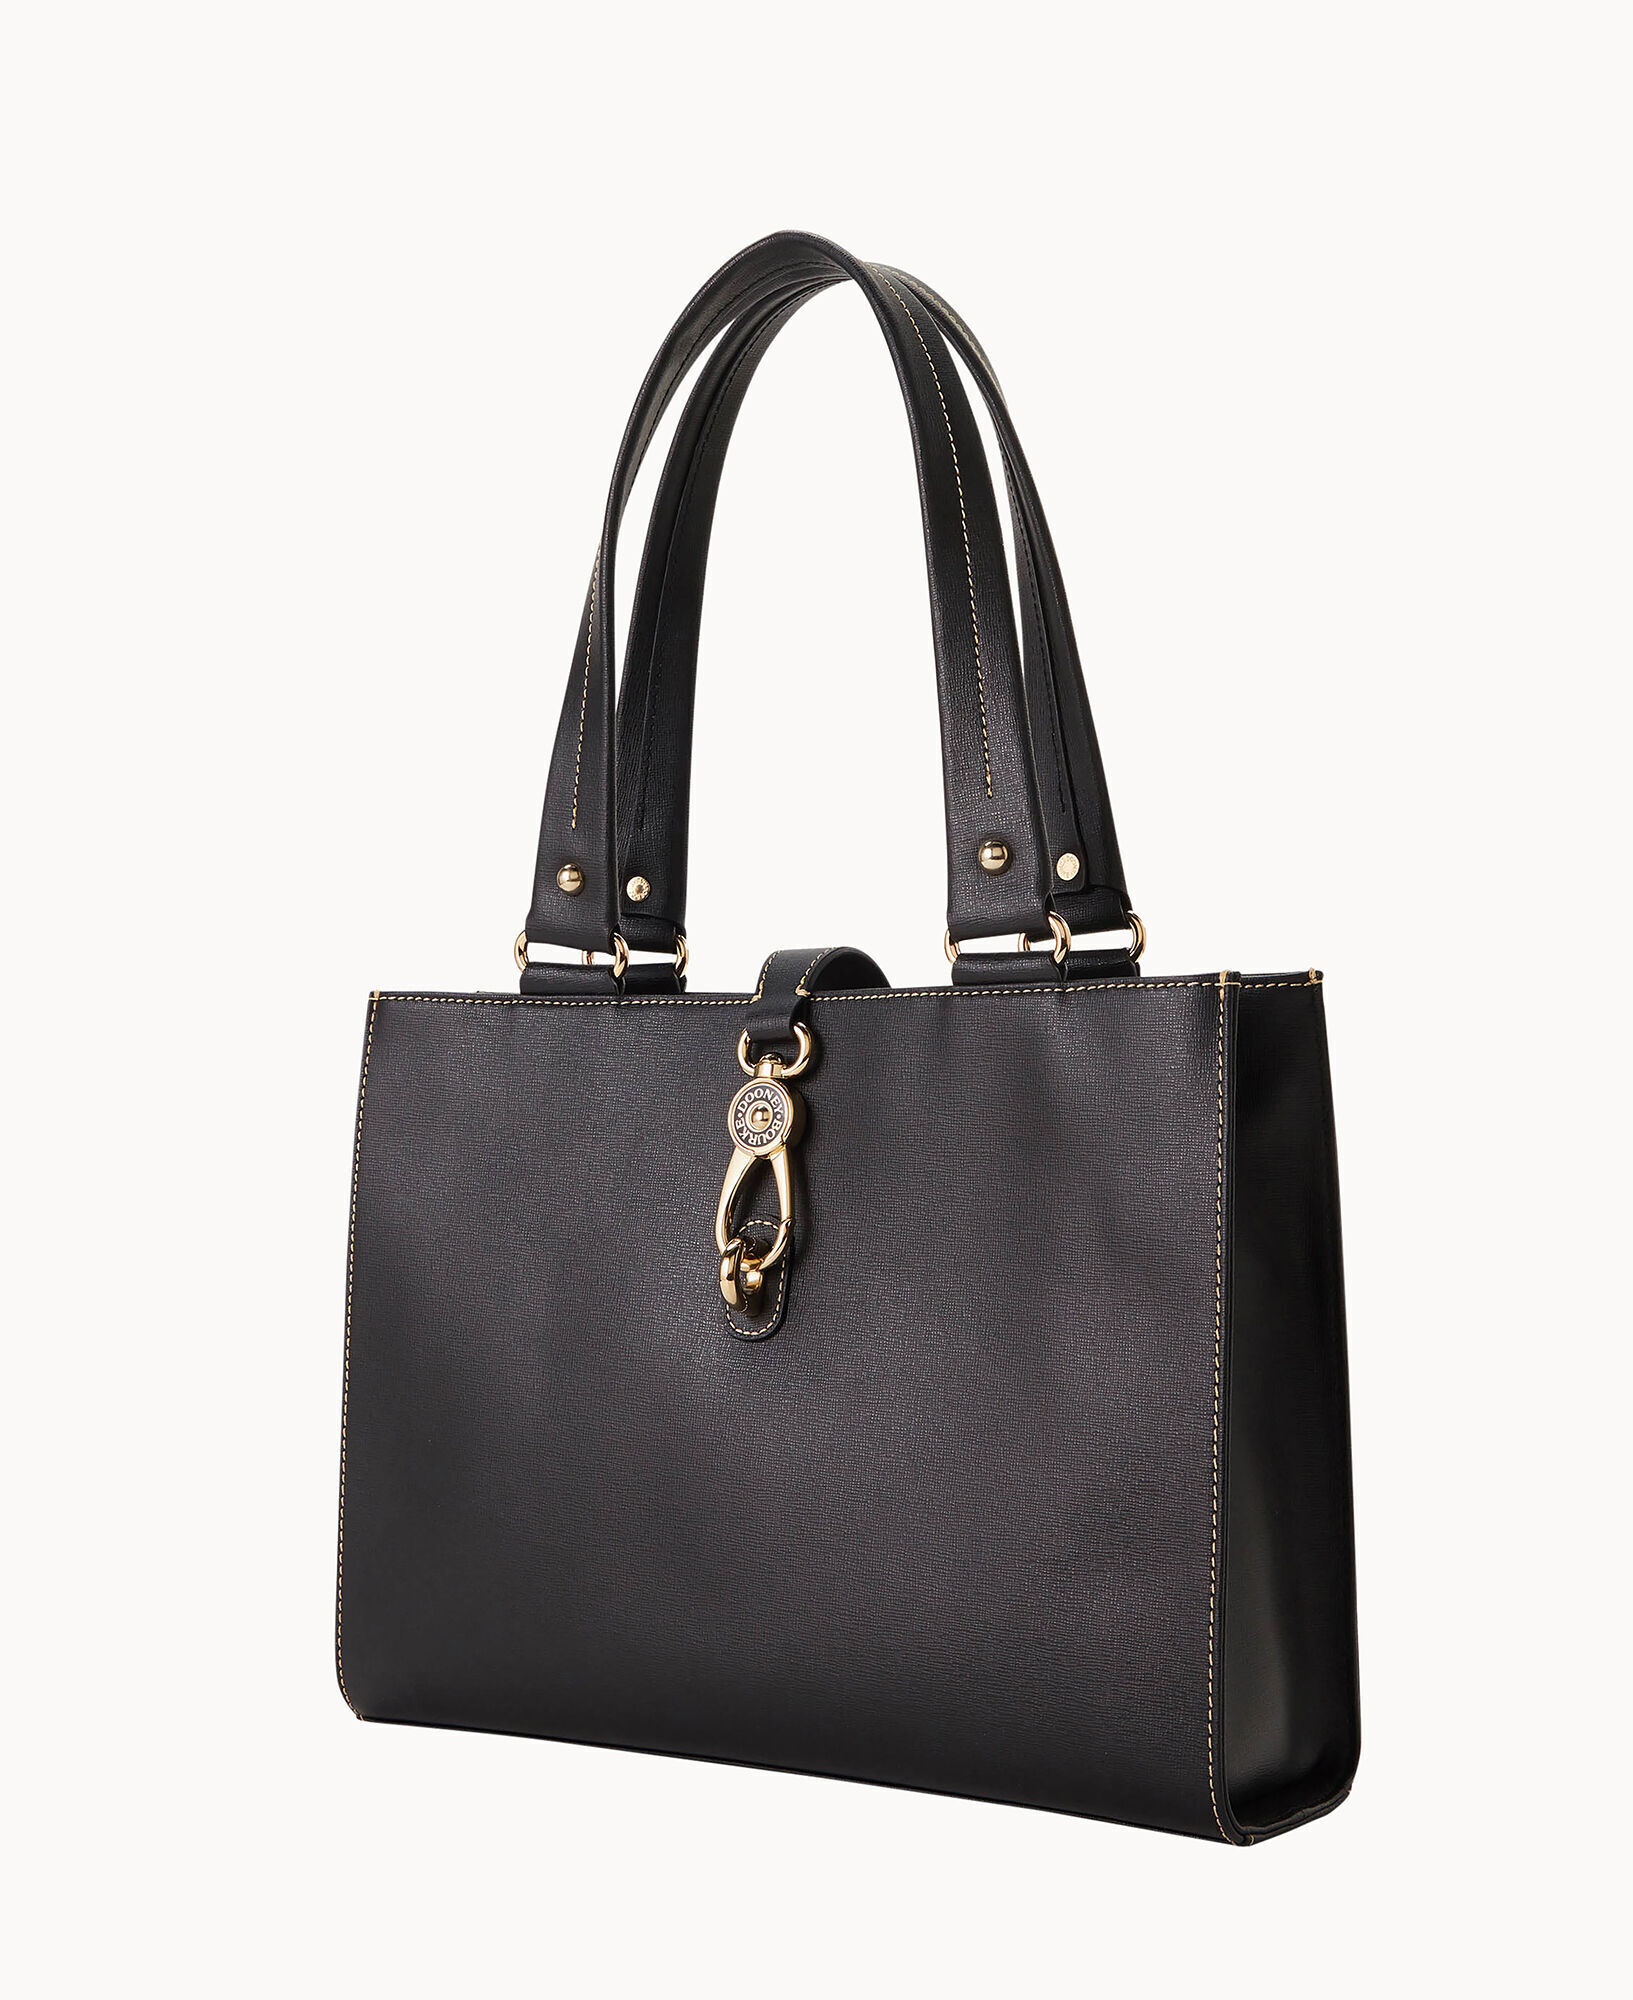 Beautiful piece from COACH! The Best selling Lock and Key Bag